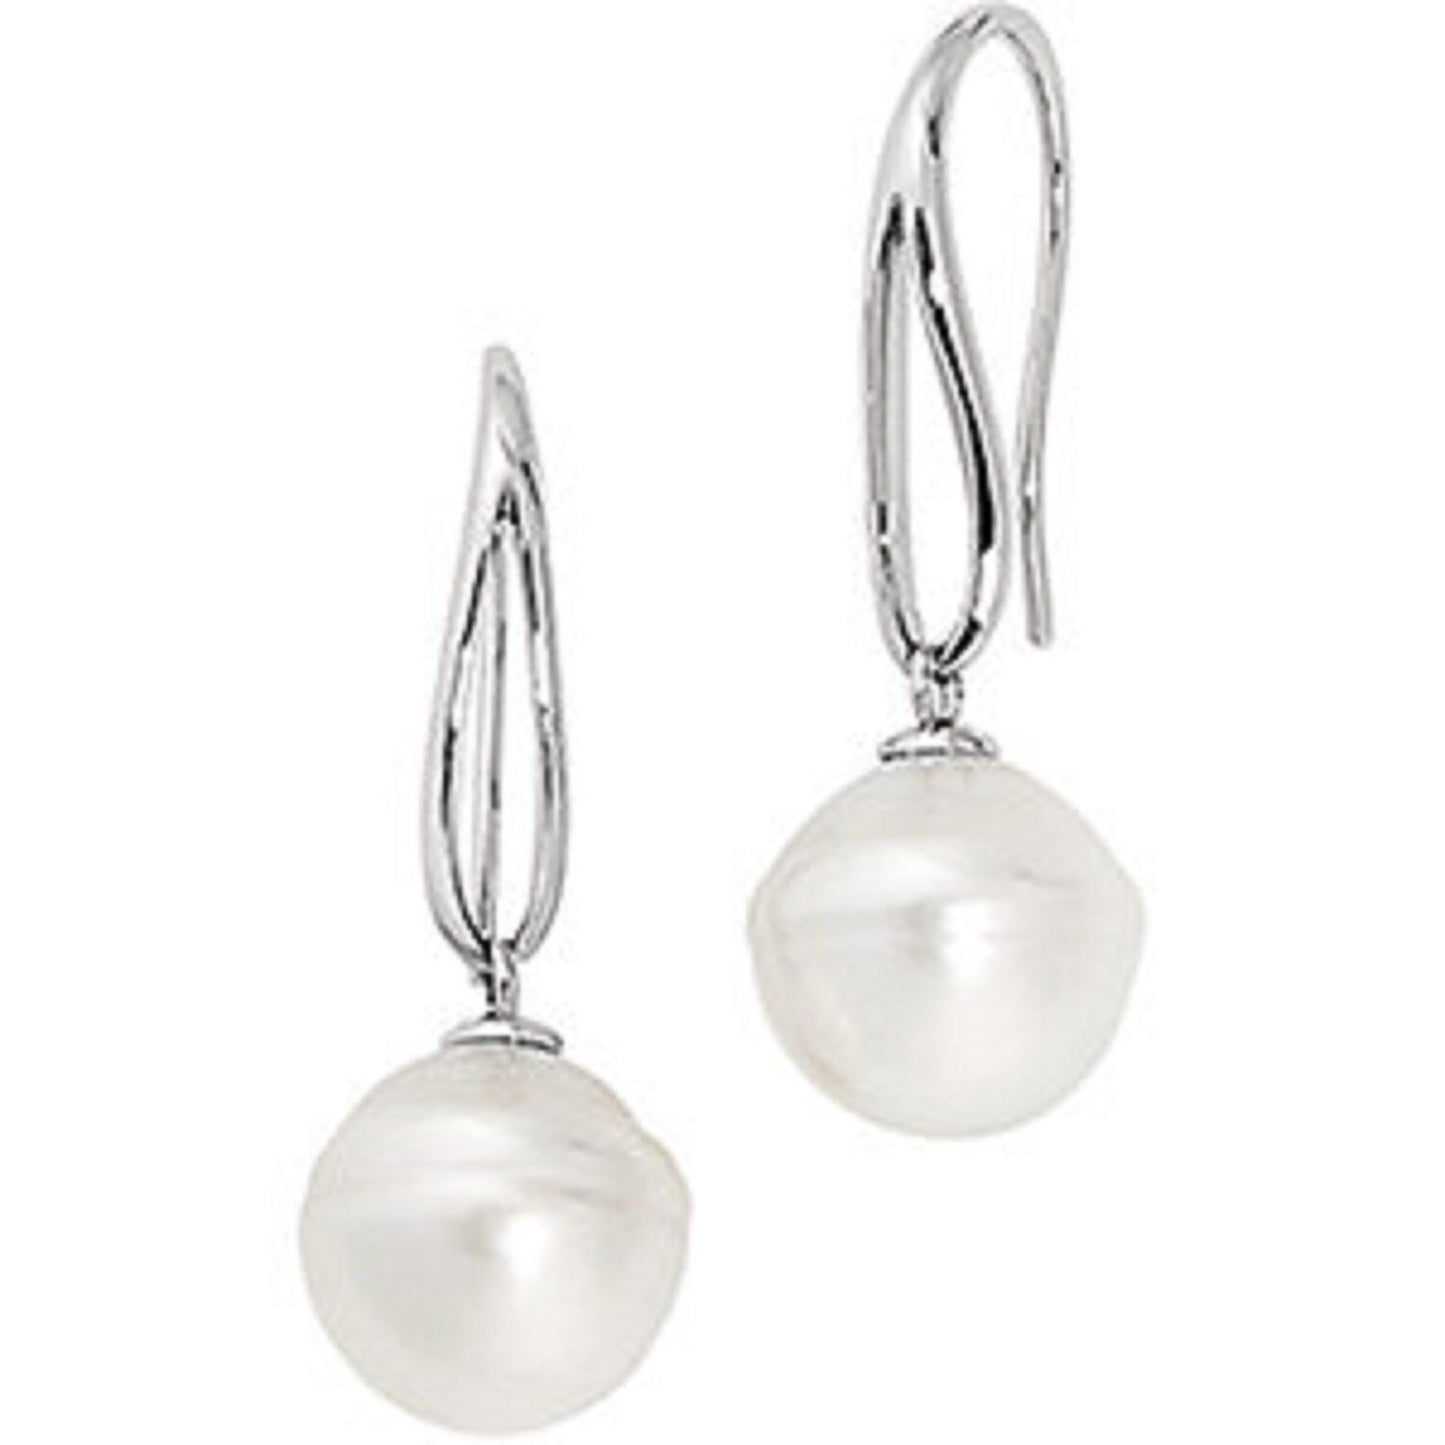 14KT White Gold Paspaley Pearl Unique Hook Earrings, 14KT White Gold Paspaley Pearl Unique Hook Earrings - Legacy Saint Jewelry